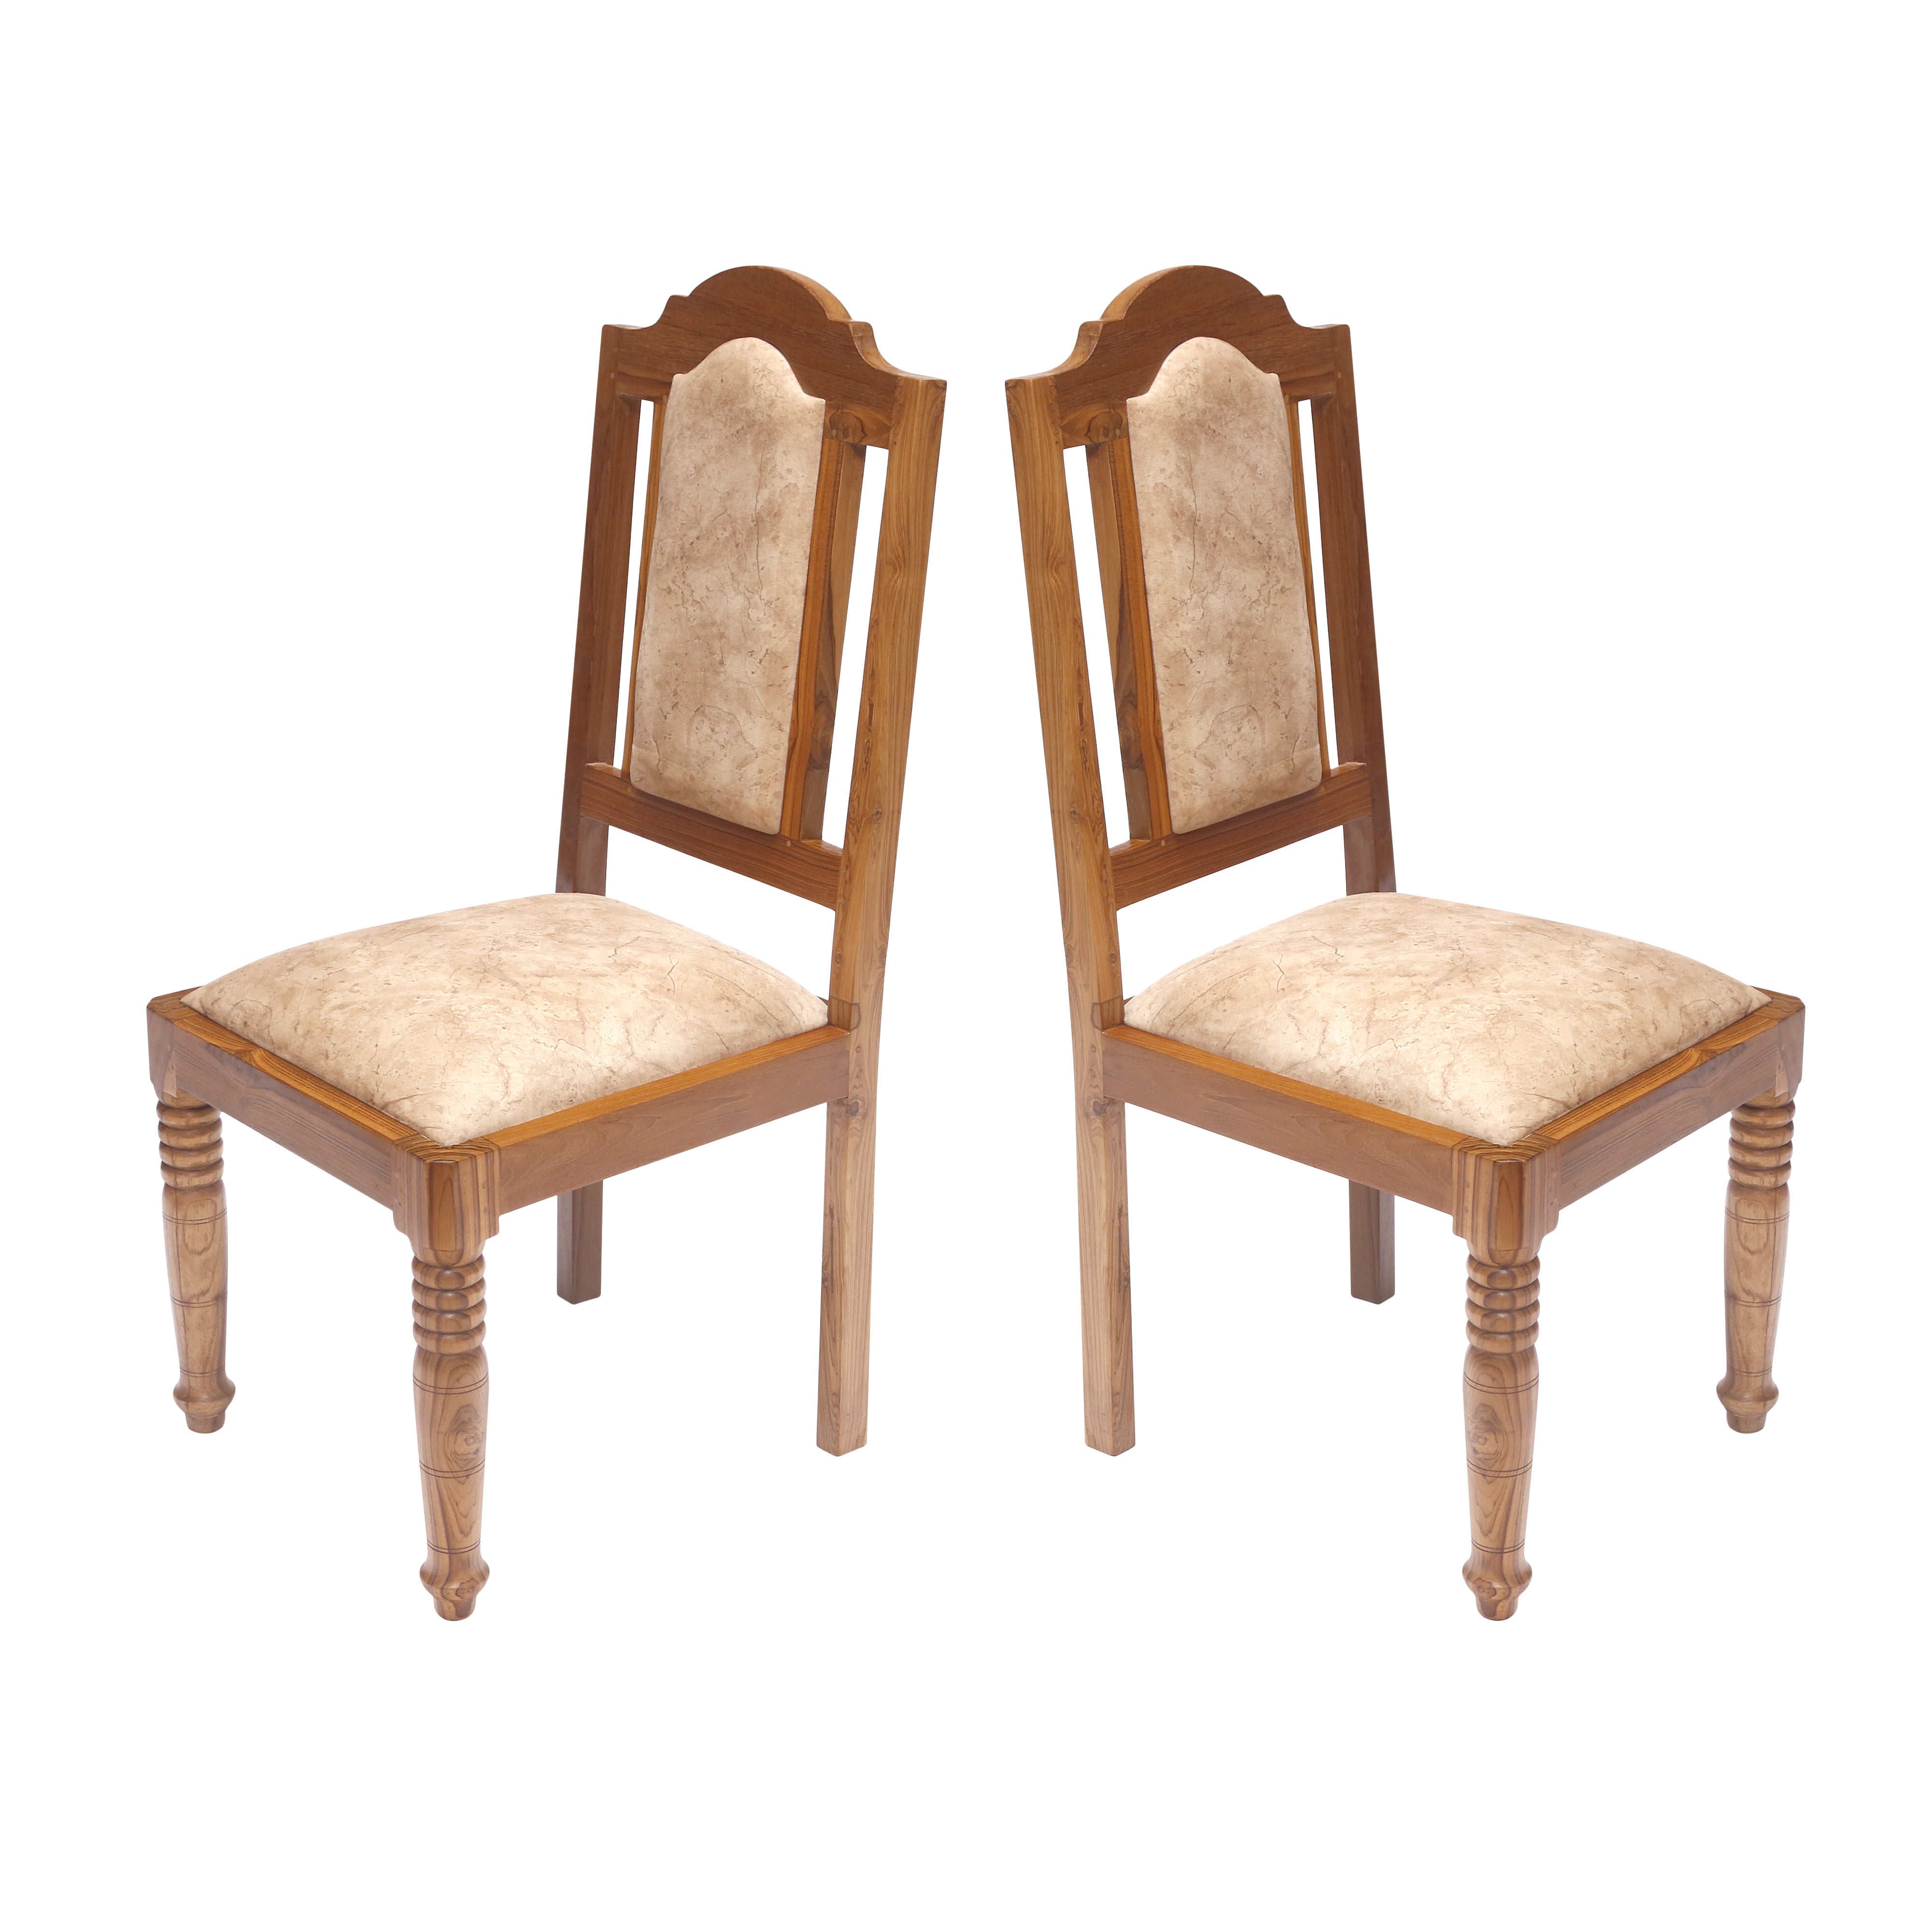 (Set of 2) Teak Wood Traditional Dinning office all purpose Chair Creamy color Dining Chair